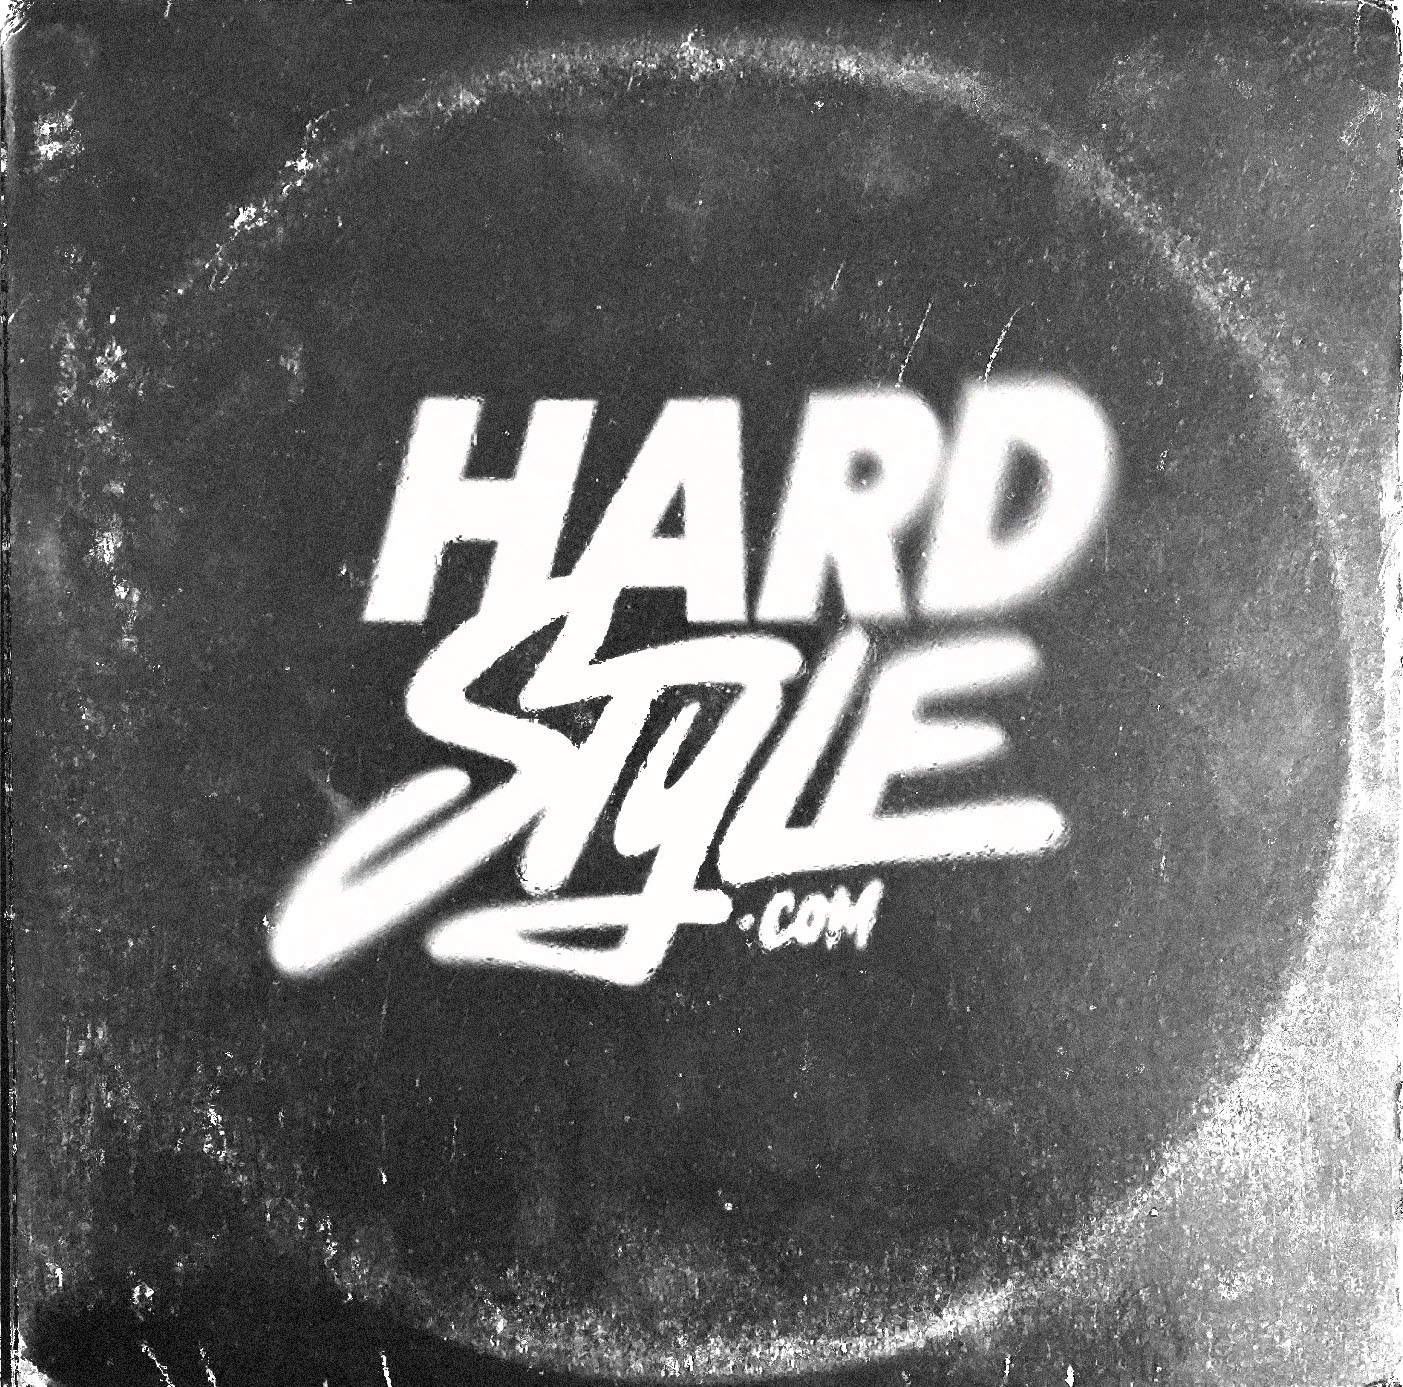 The Tunnel Hardstyle E.P. (Web Edition)